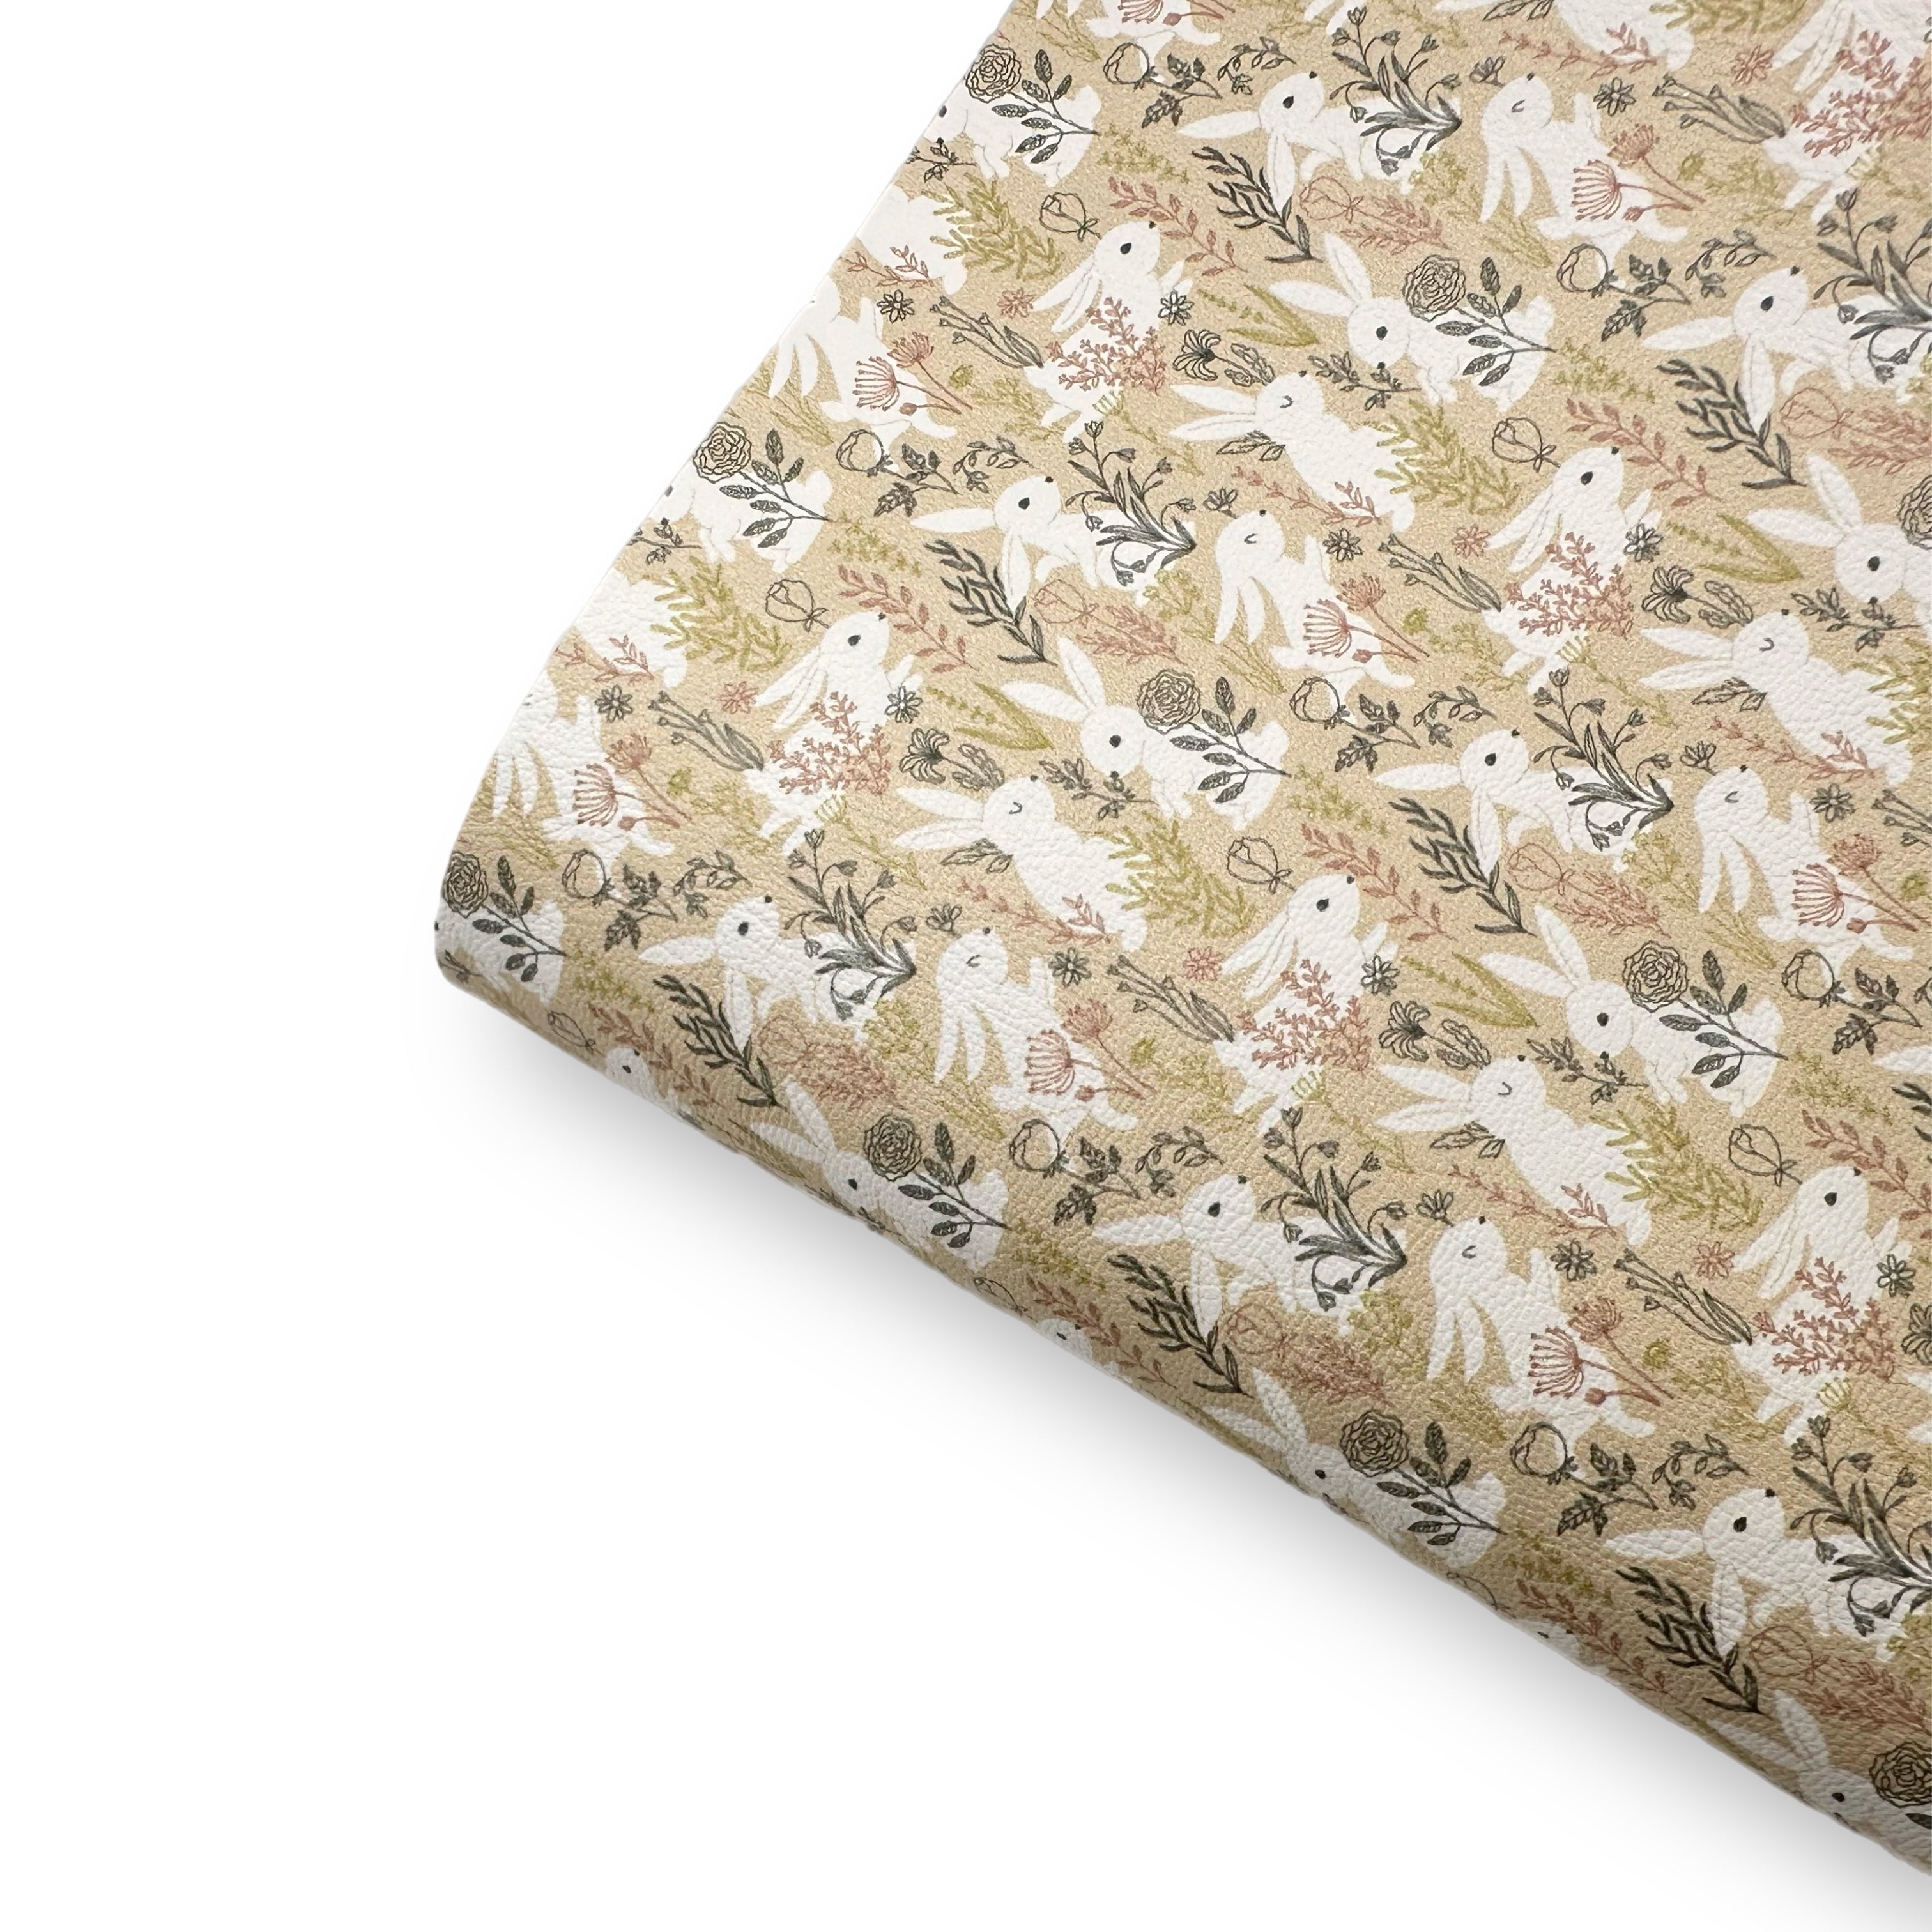 Natural Bunny Premium Faux Leather Fabric